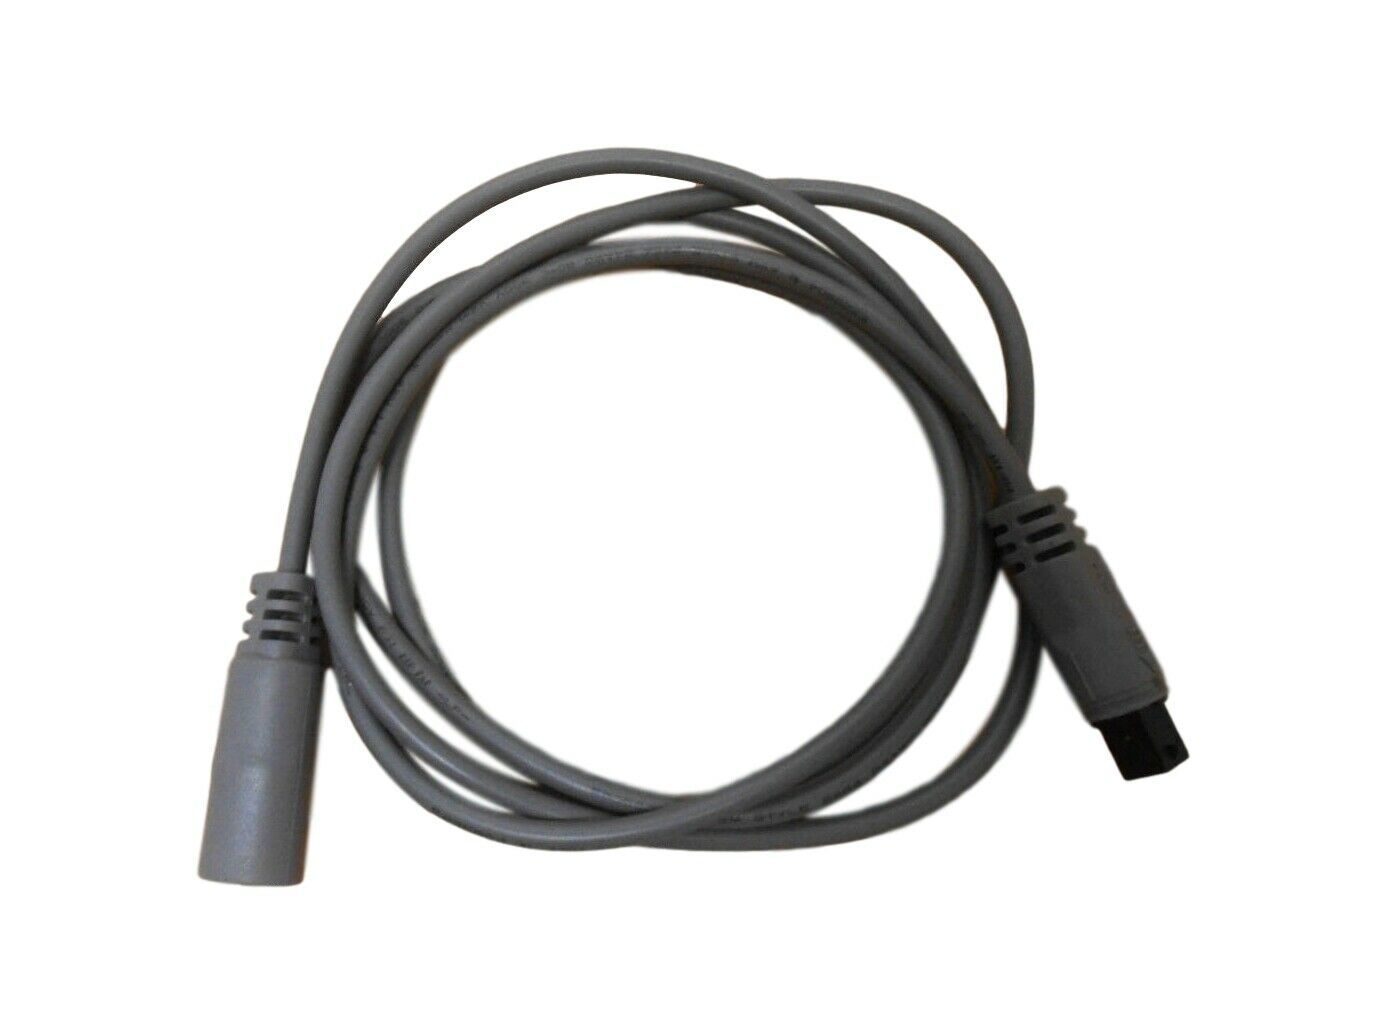 Watkins 74980 Extension Cable for LED Light - 5' Ft HotSpring Limelight HotSpot - $43.55